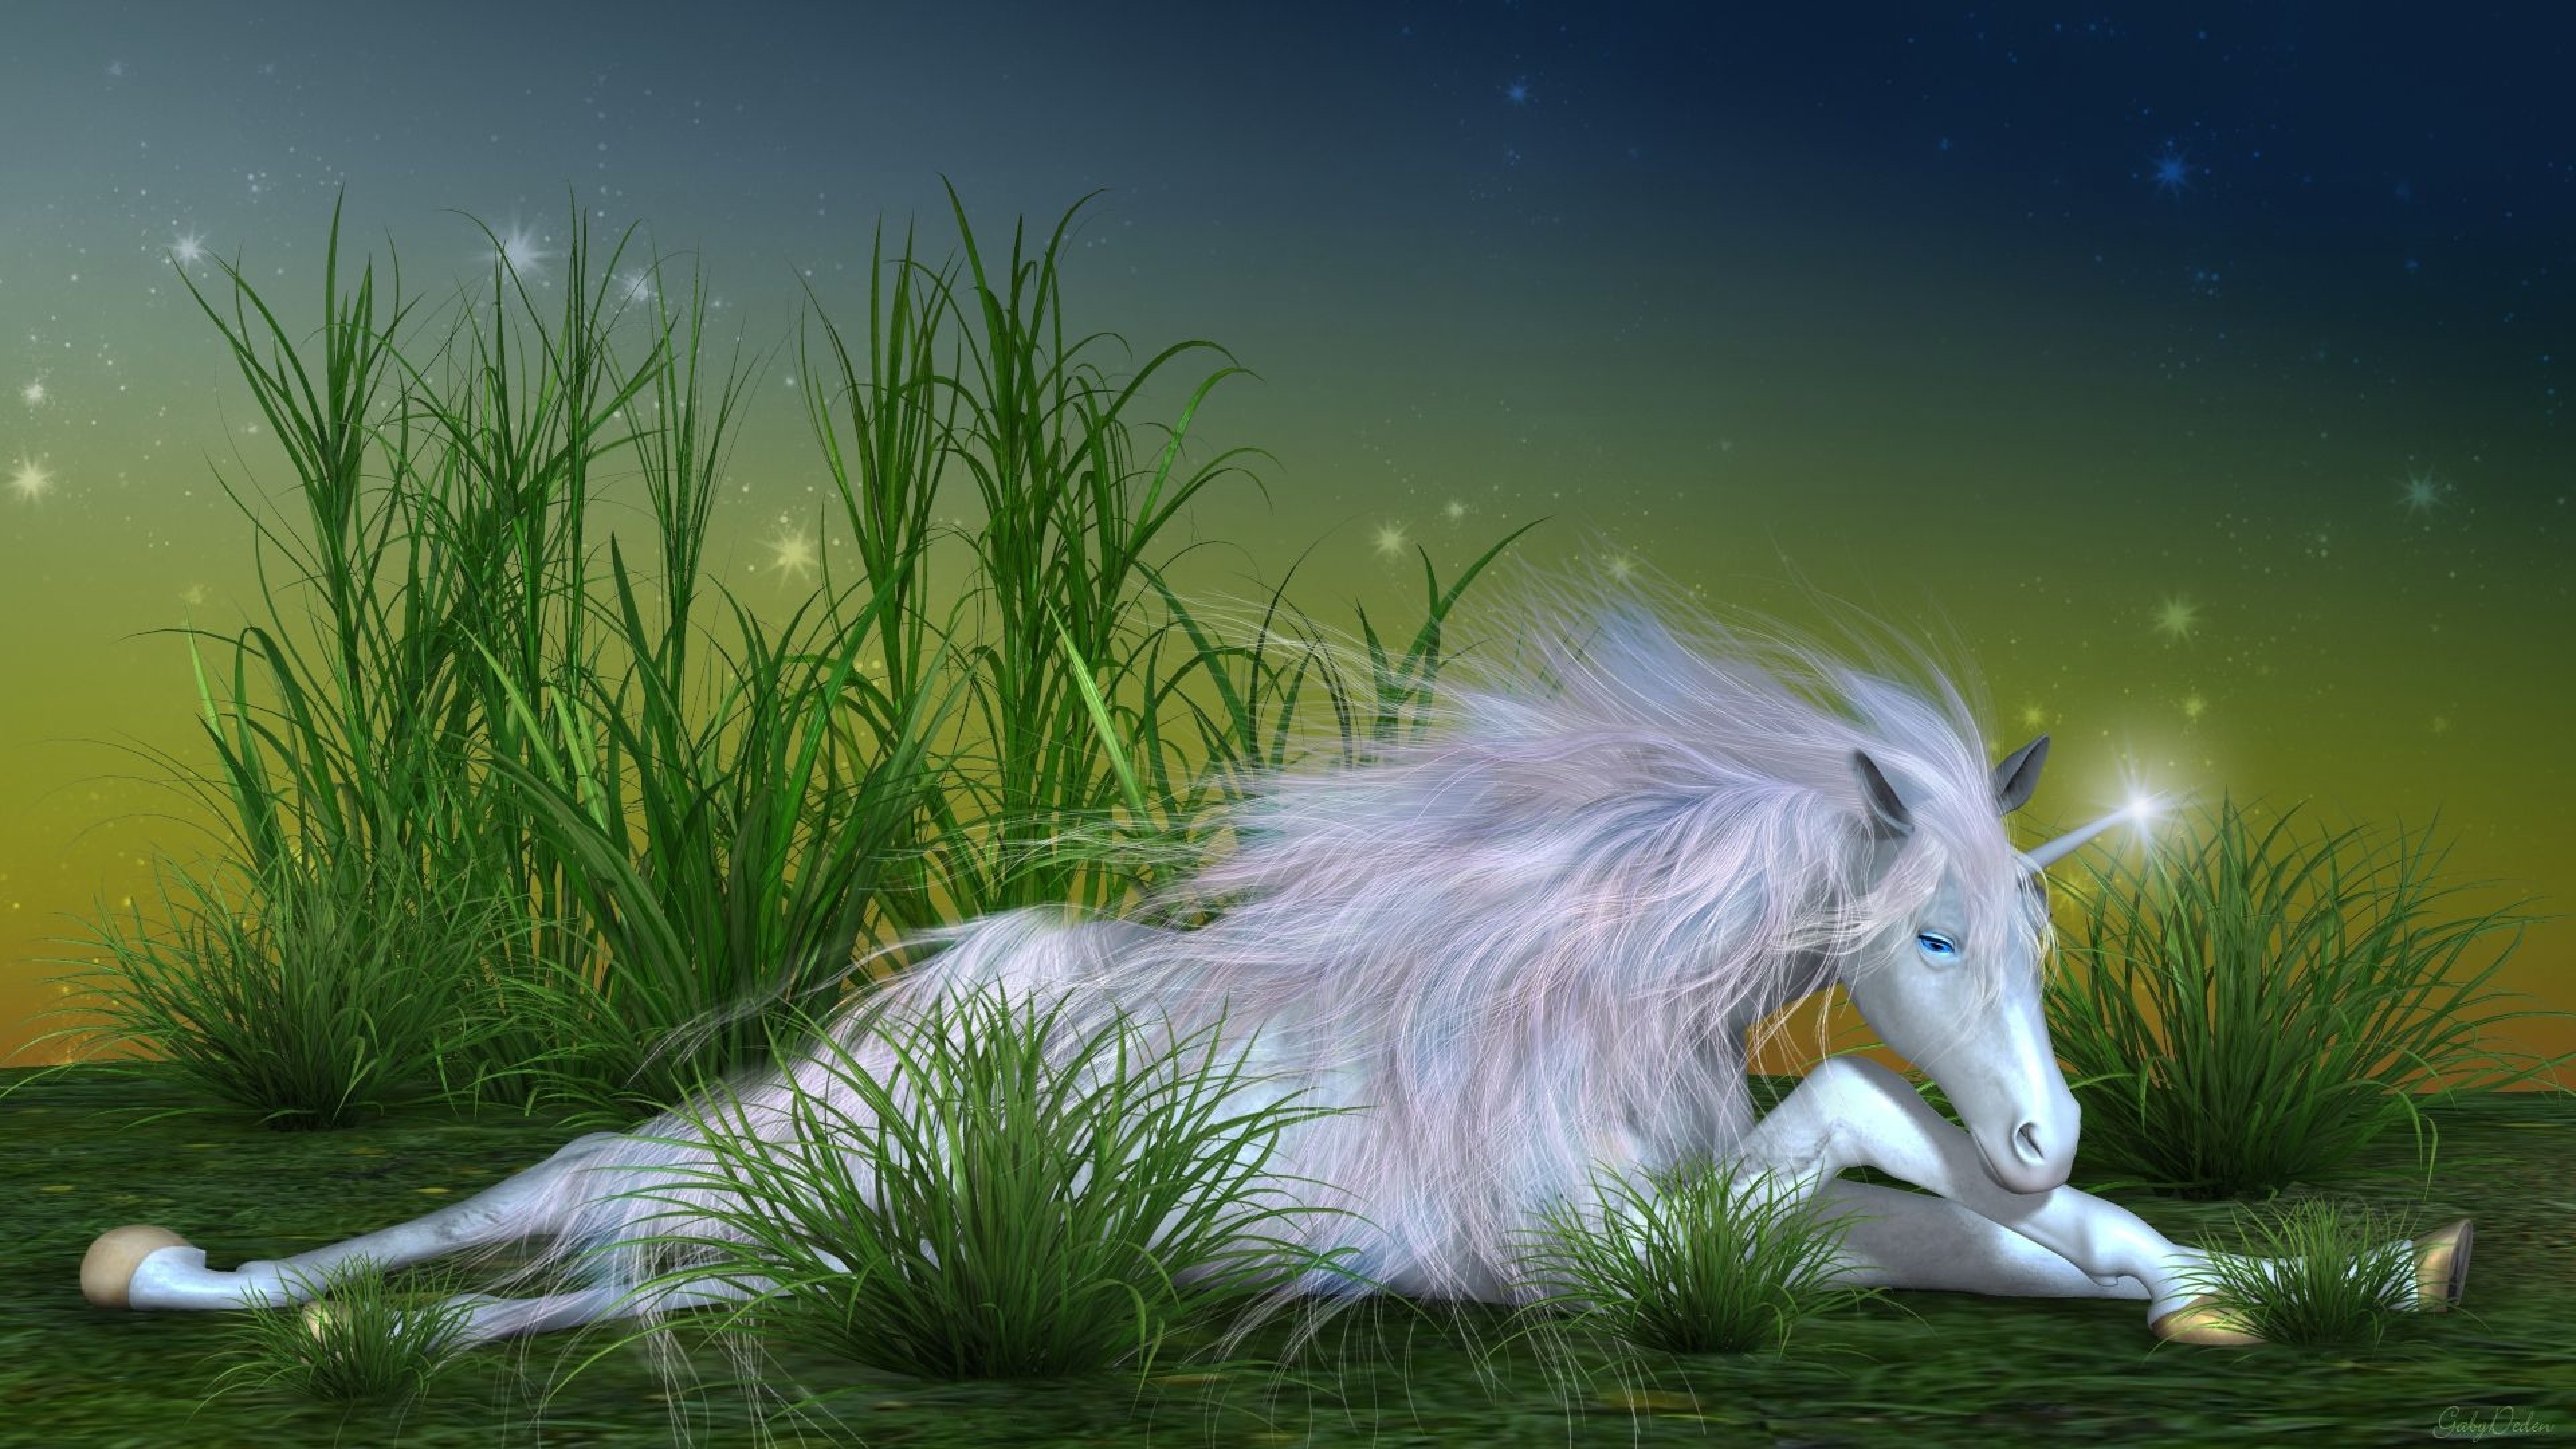 White Long Haired Animal on Green Grass. Wallpaper in 3840x2160 Resolution